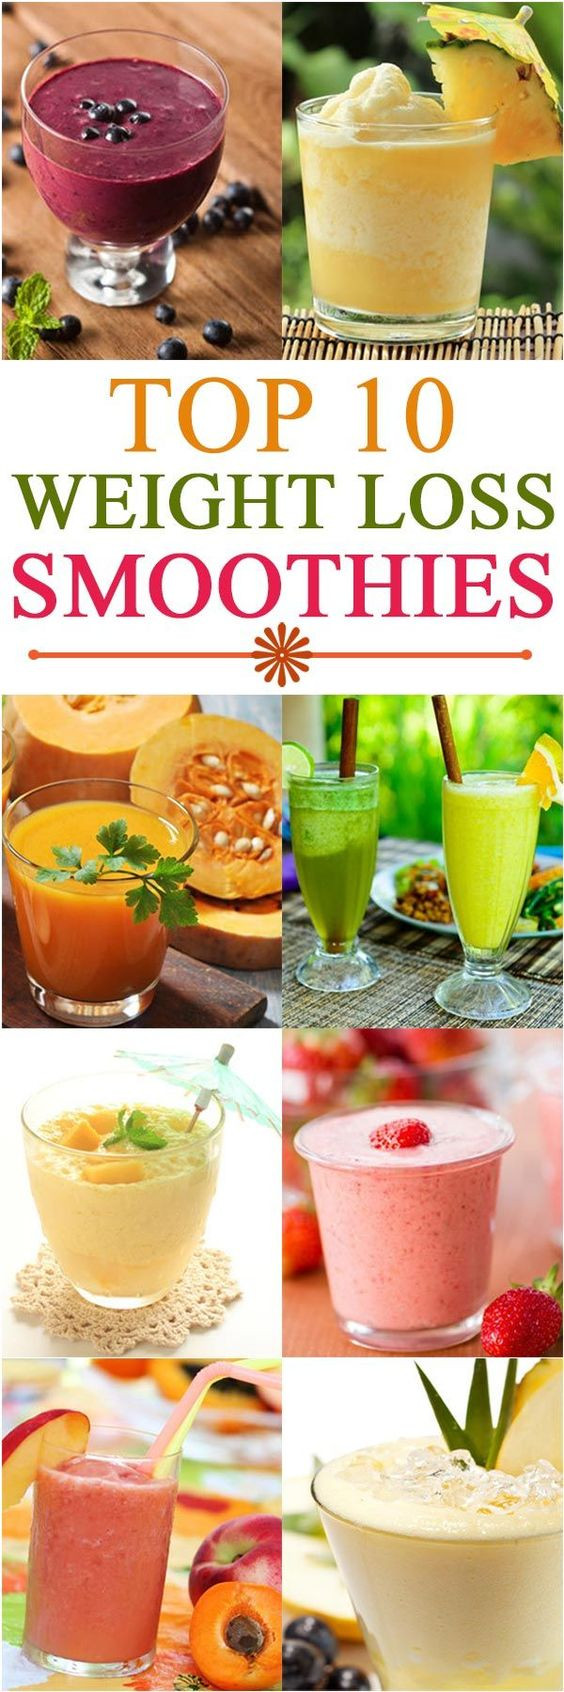 Pre Made Smoothies For Weight Loss
 Gezondheid Smoothies and Smoothie on Pinterest